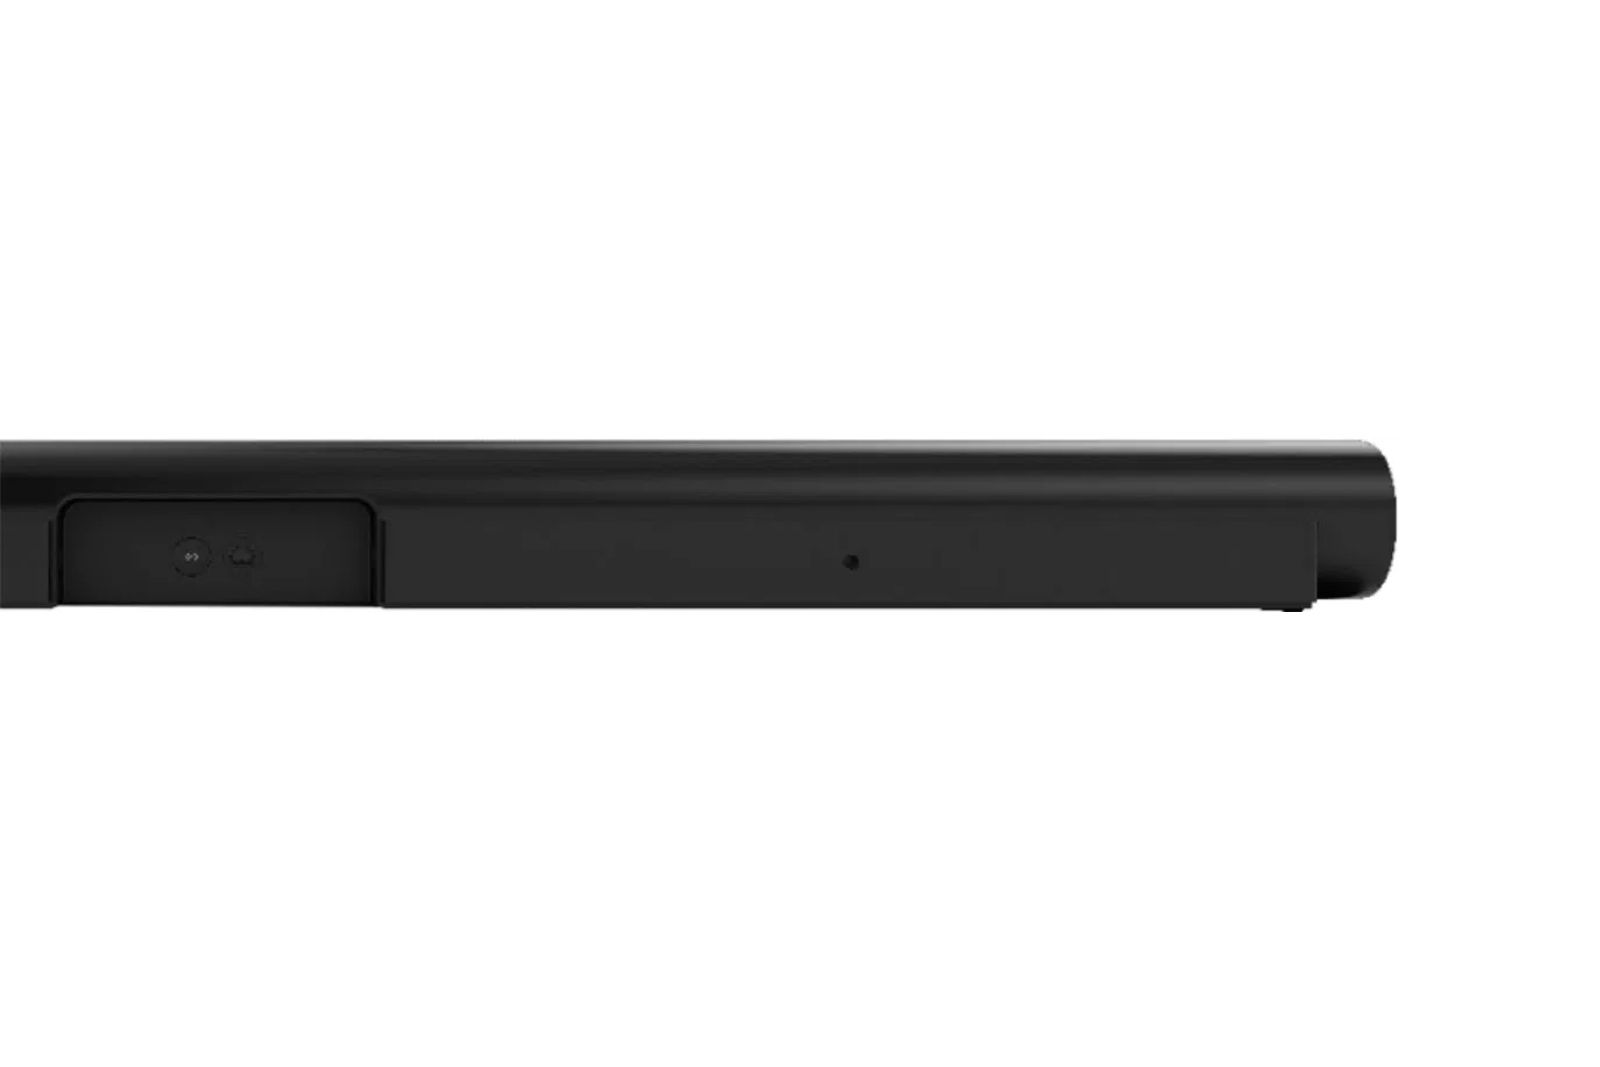 Unfinished renders leak for a new Sonos Playbar 2 image 2